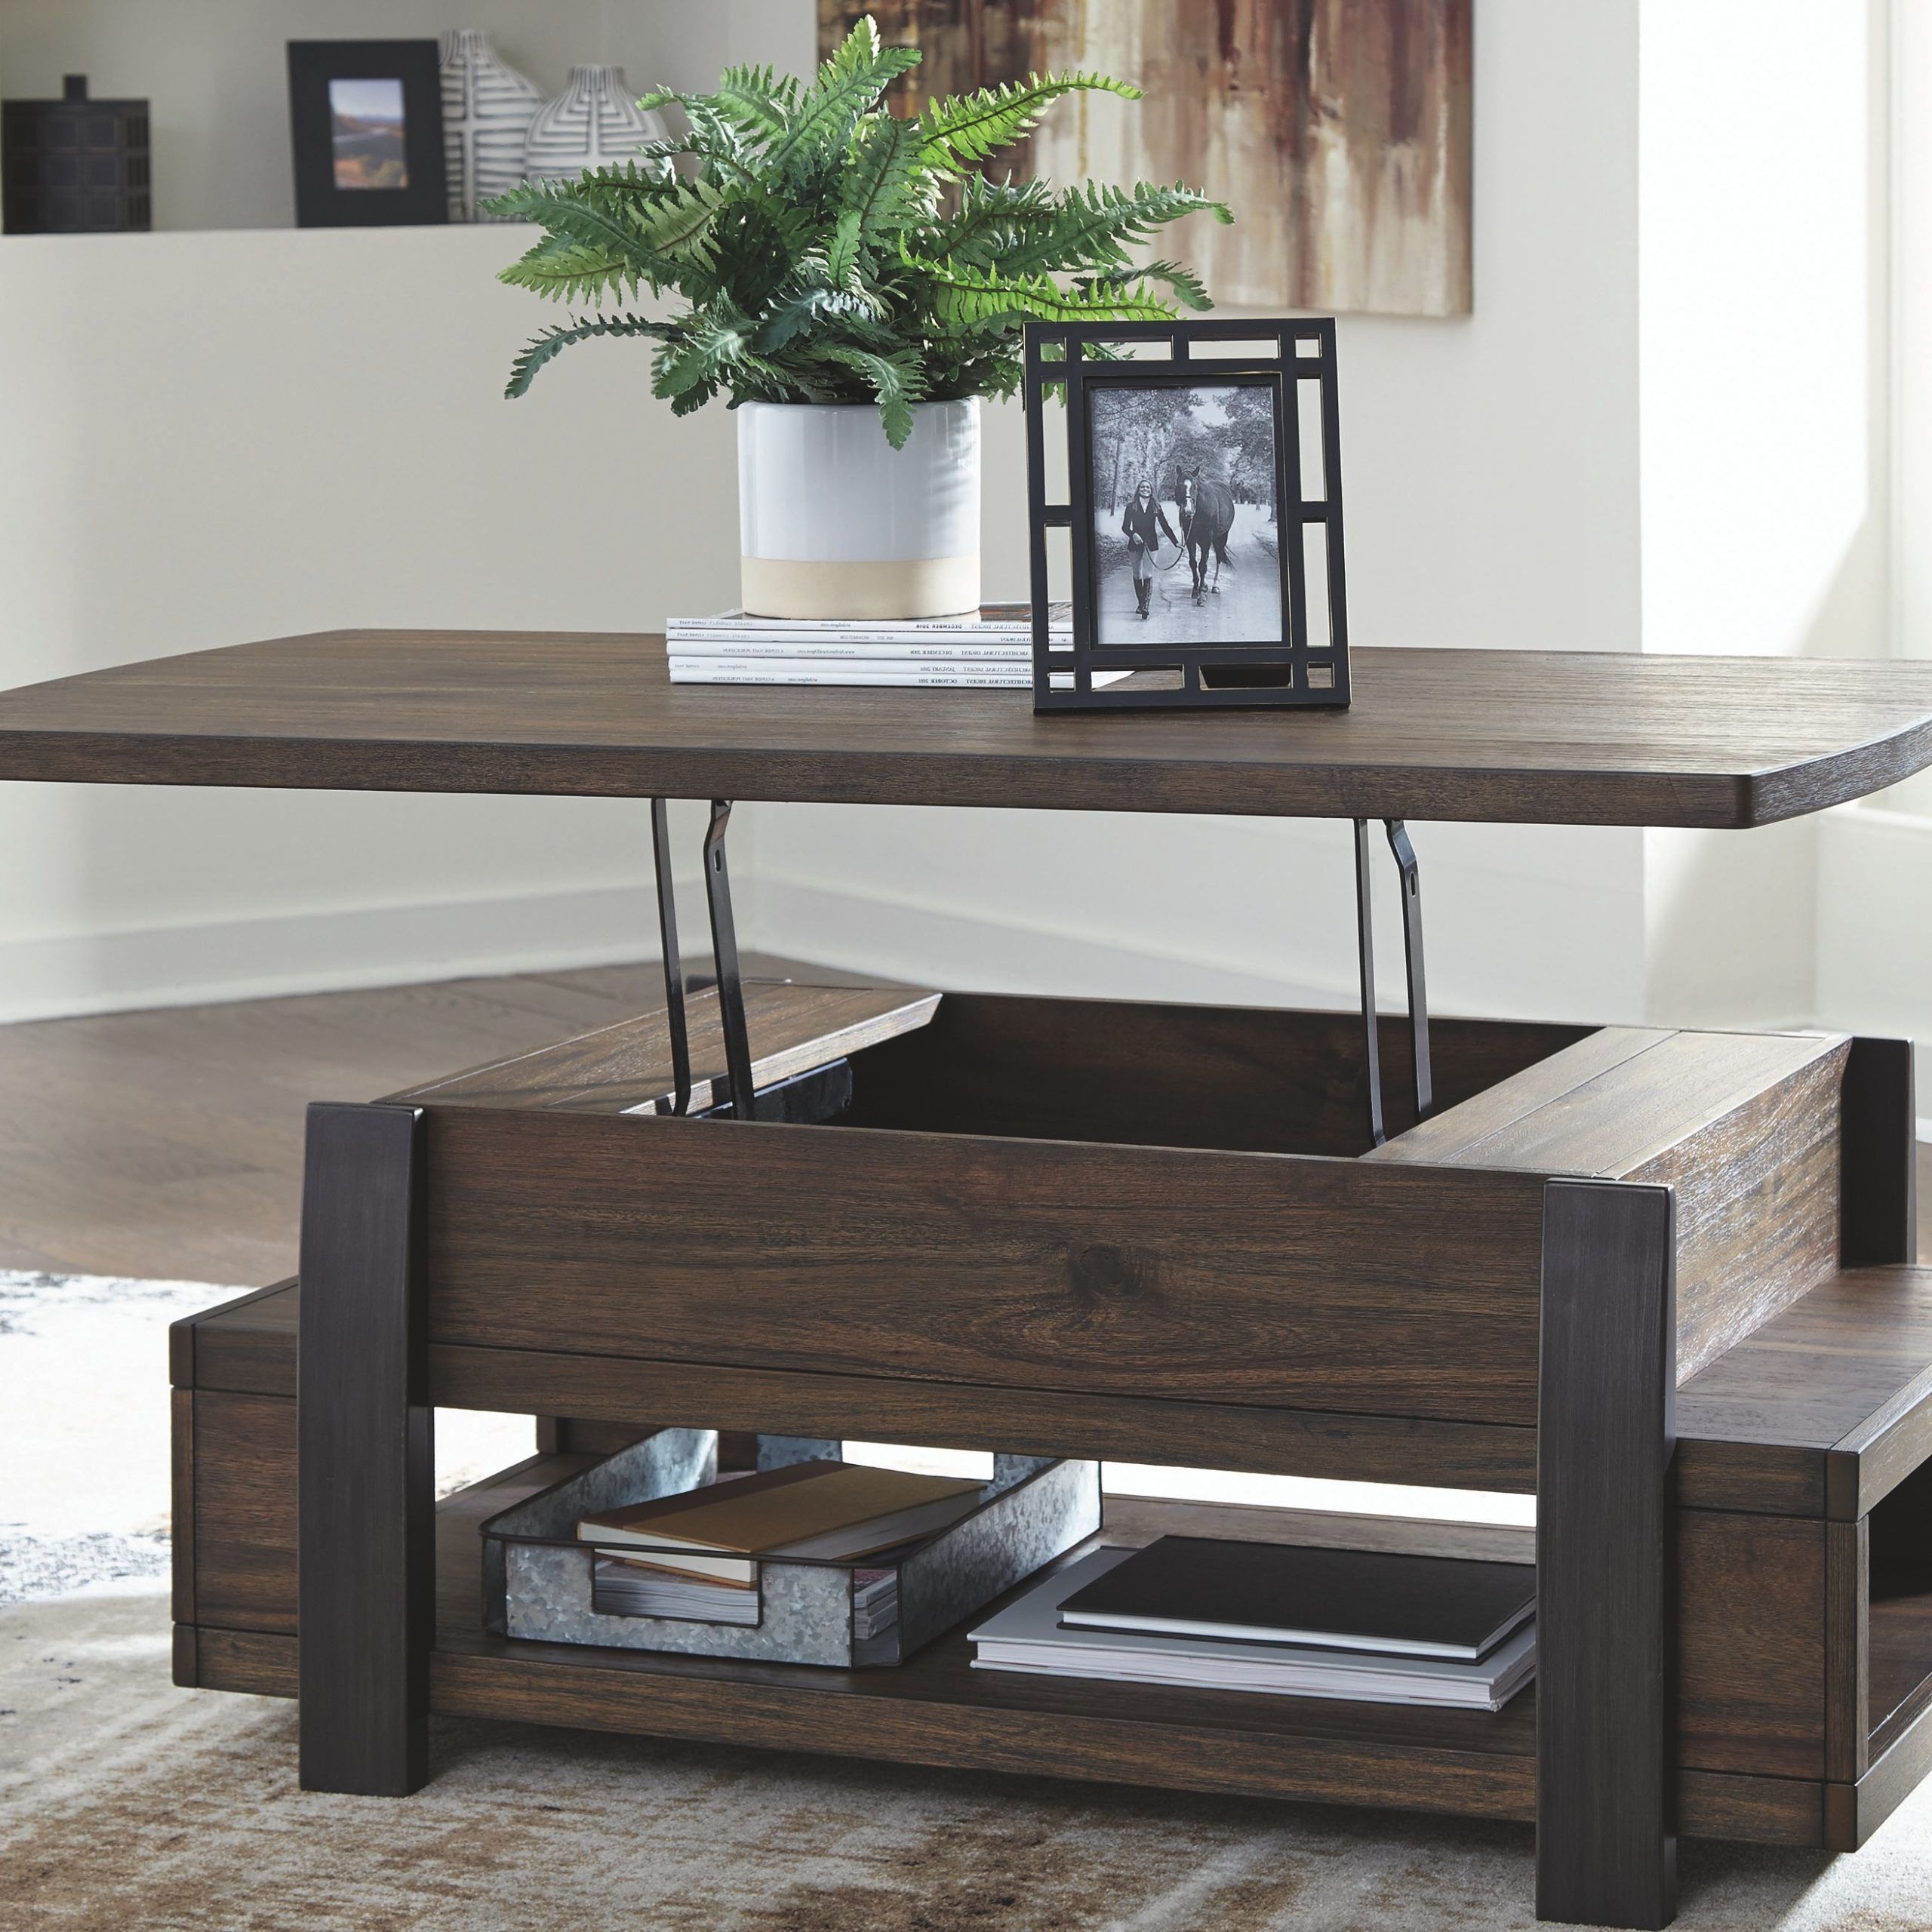 Modern Wooden Lift Top Tables Throughout Best And Newest Why The Lift Table Coffee Table Is A Must Have For The Modern Home (View 7 of 15)